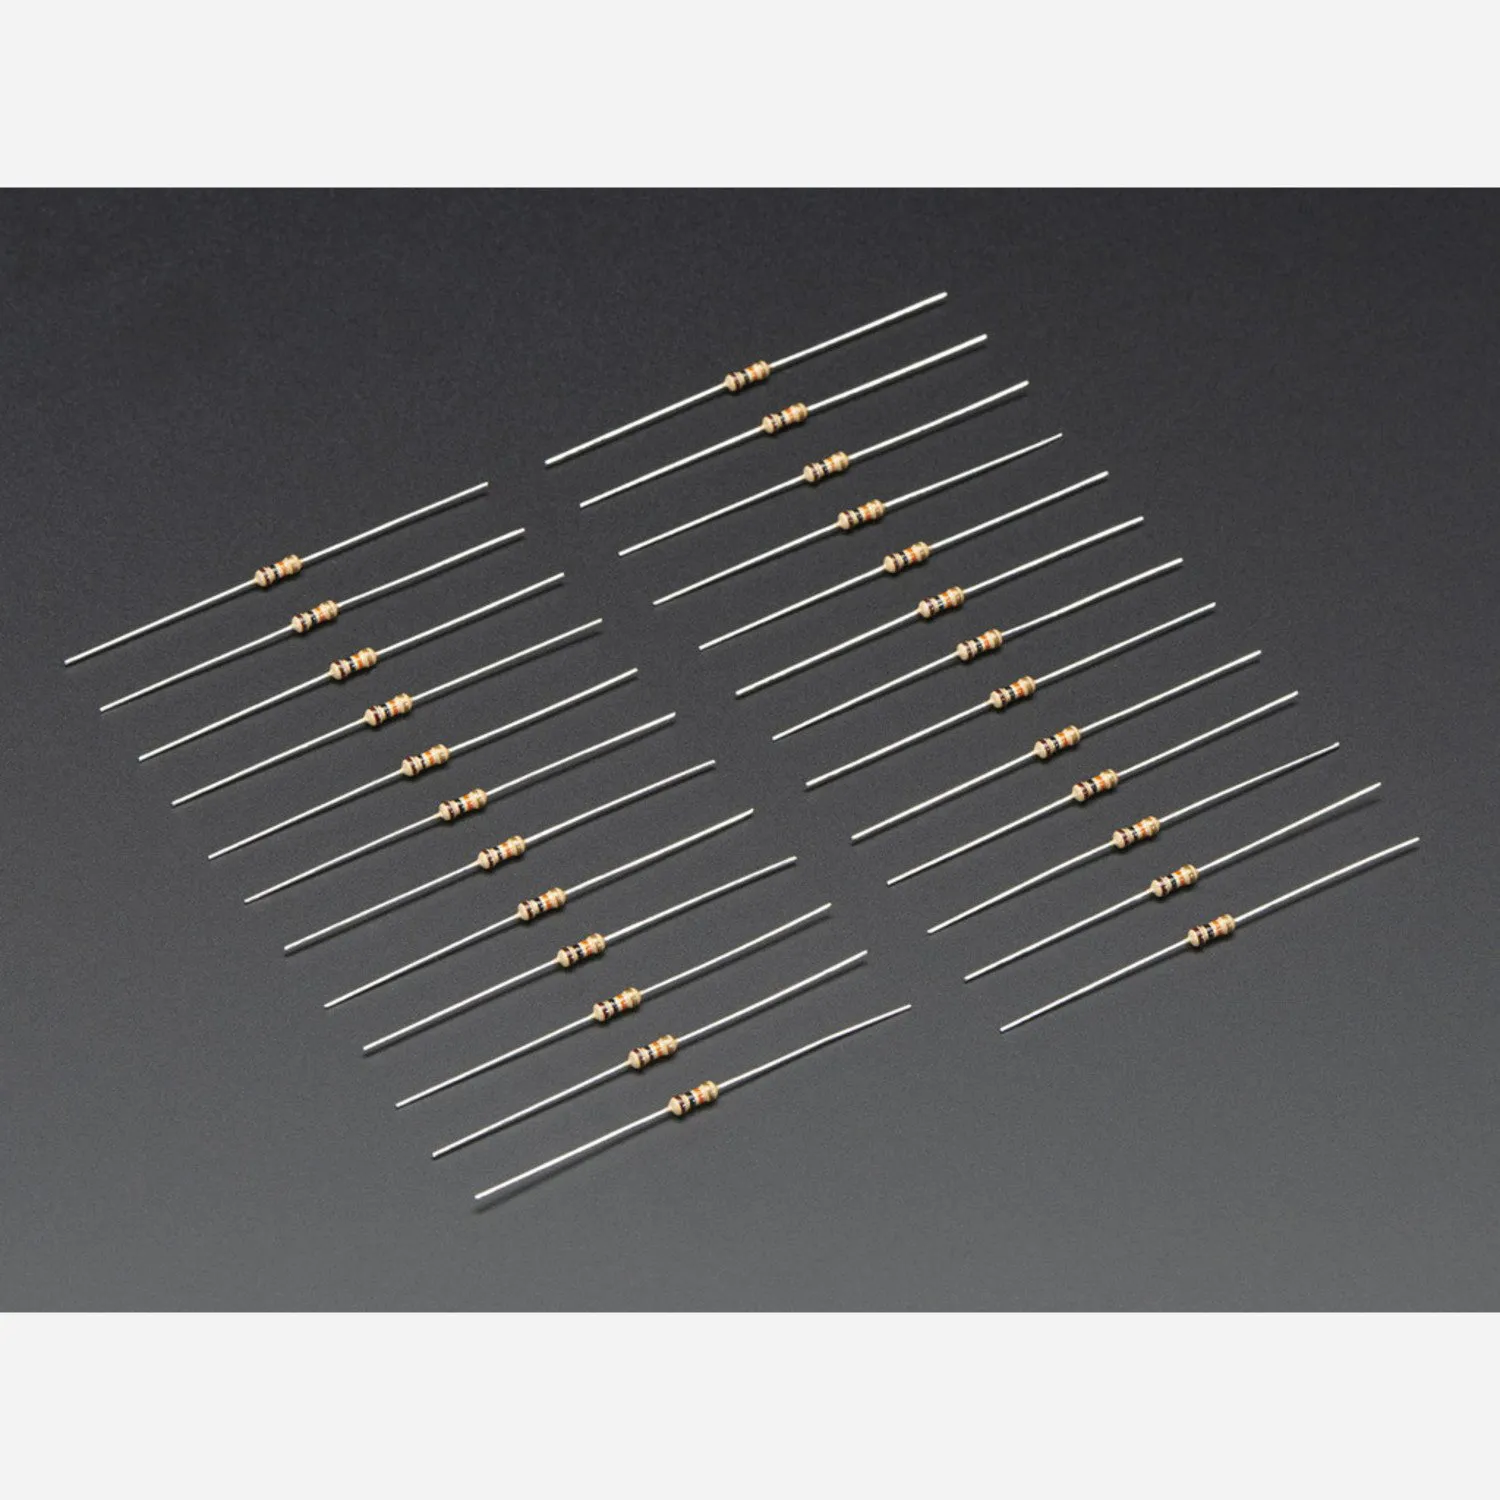 Photo of Through-Hole Resistors - 10K ohm 5% 1/4W - Pack of 25